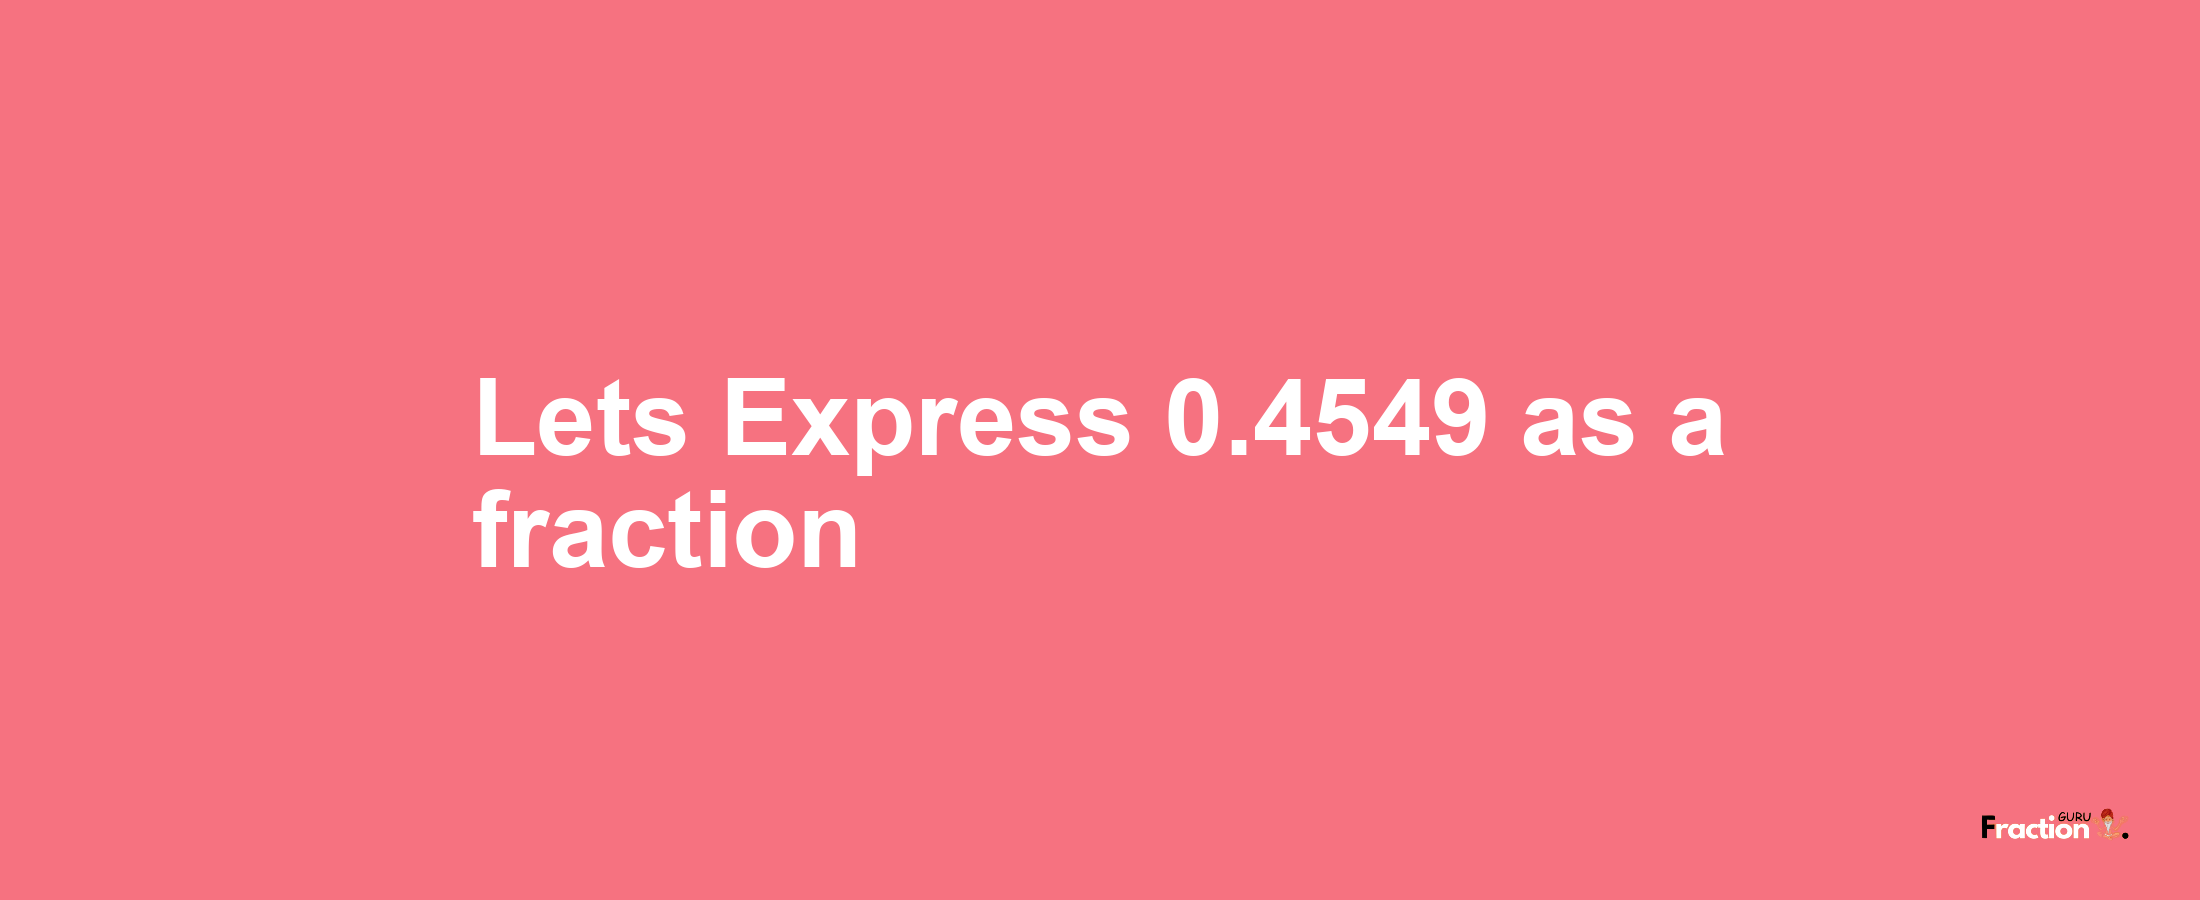 Lets Express 0.4549 as afraction